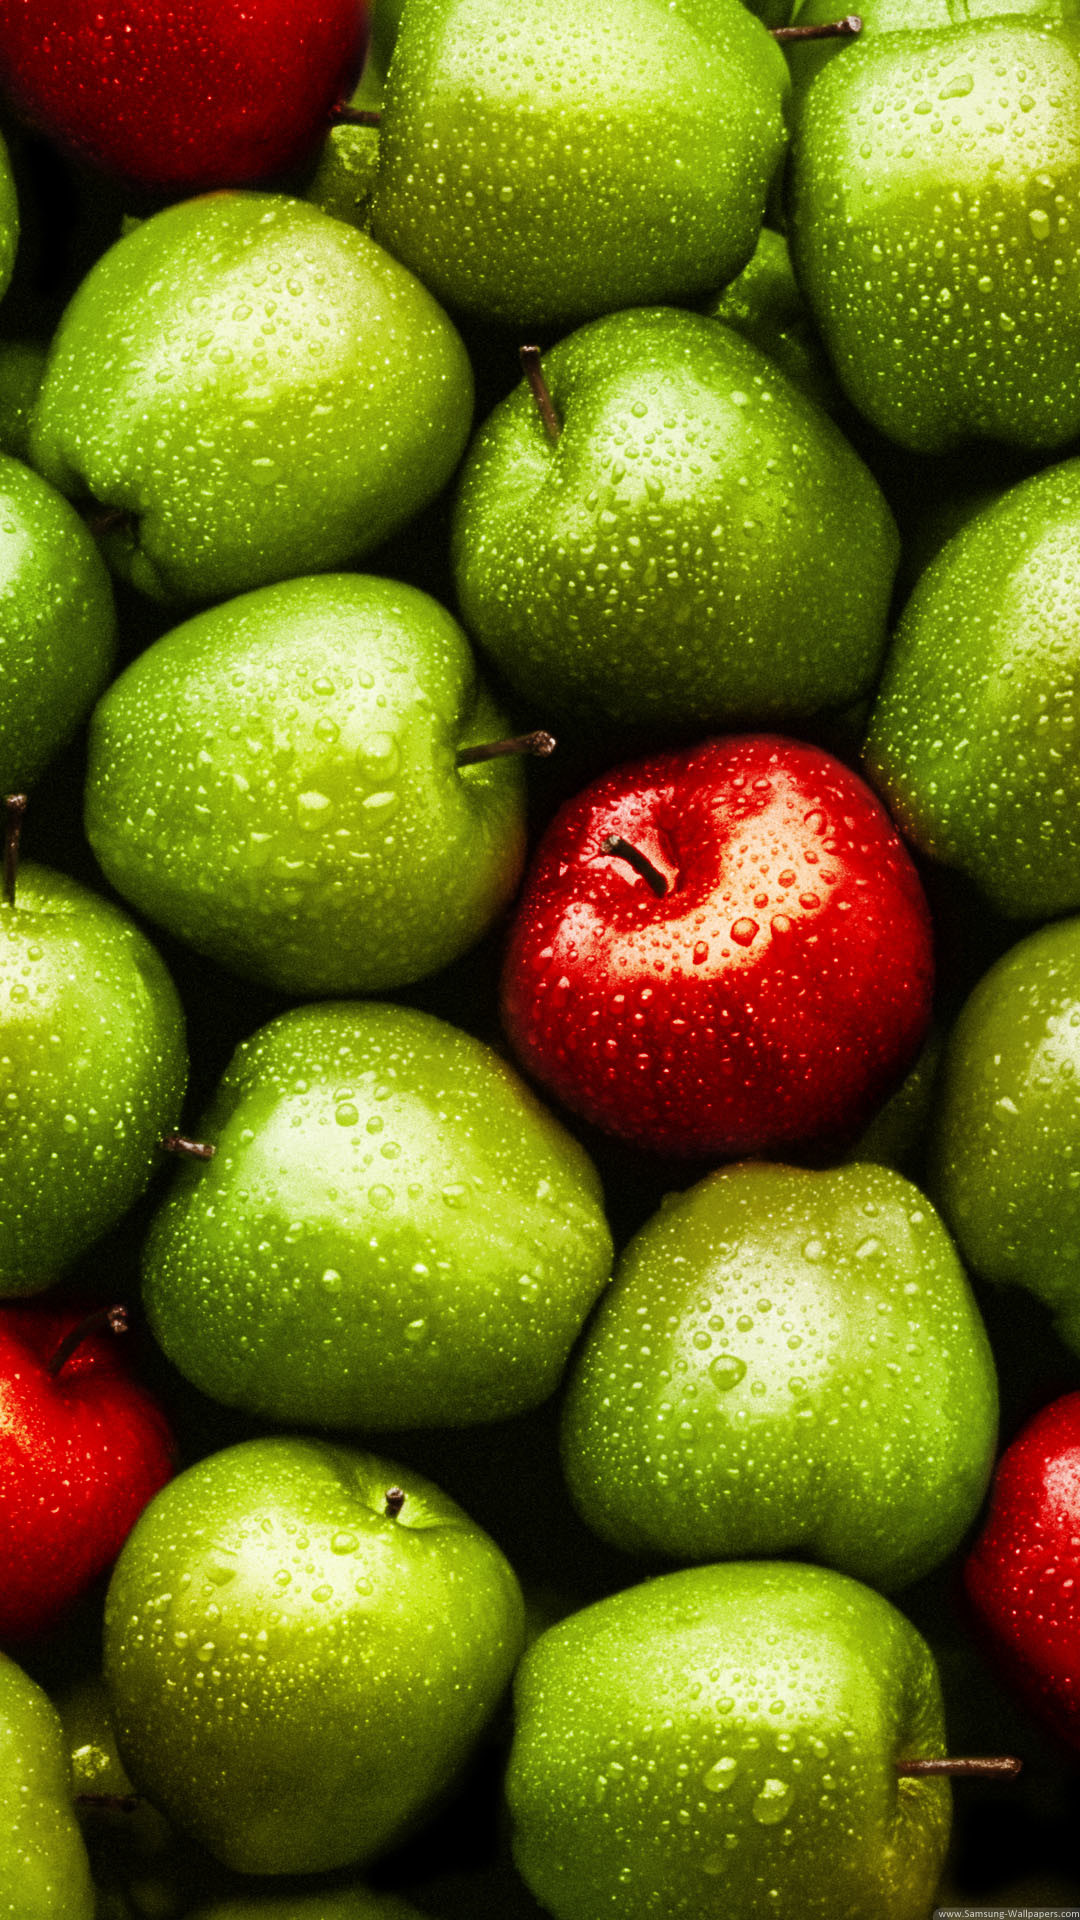 Green Red Apples Iphone 6 Plus Hd Wallpaper 
 Data - Apple Fruit Wallpaper Portrait - HD Wallpaper 